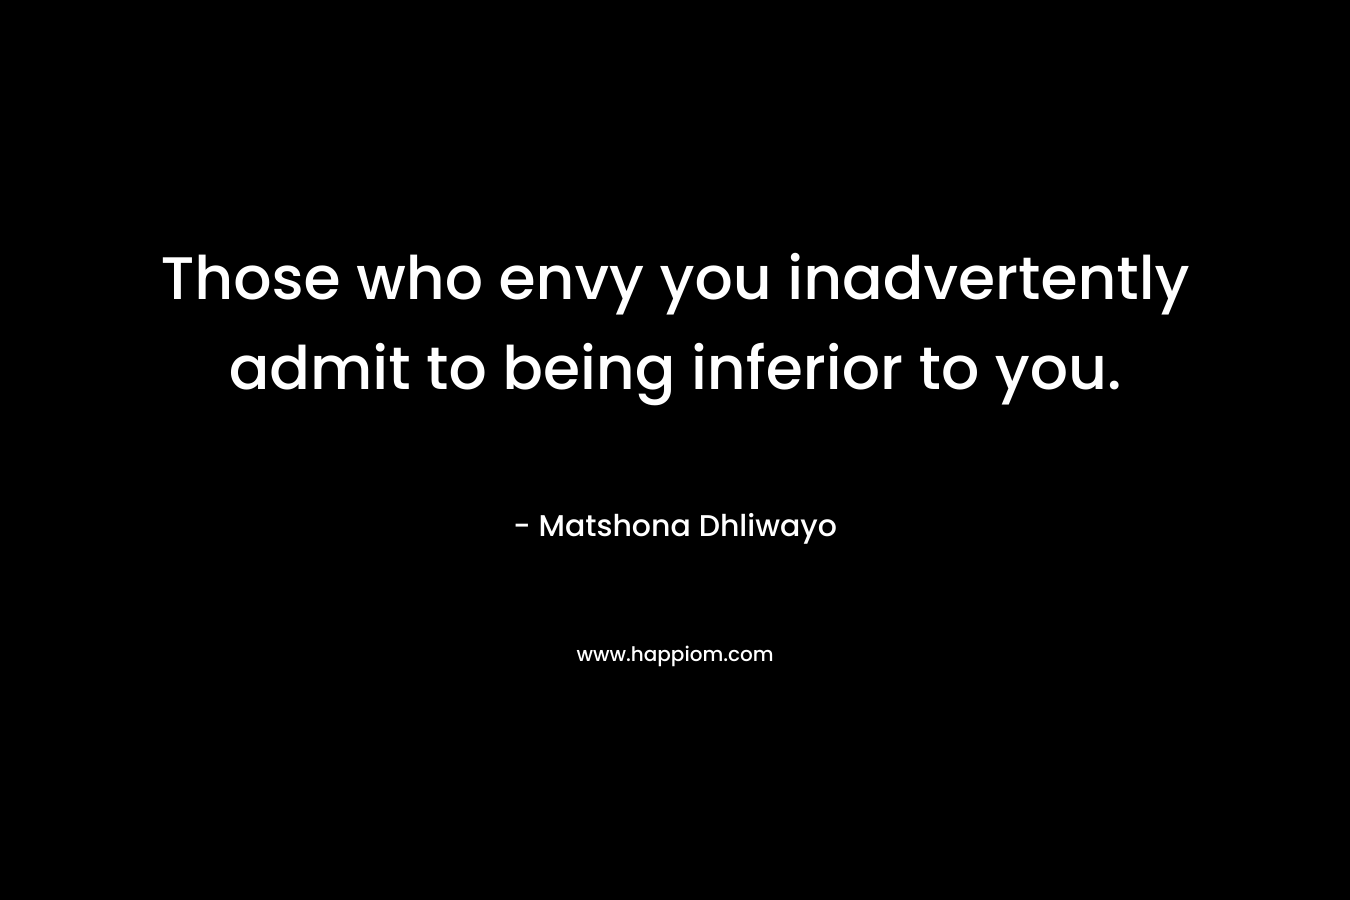 Those who envy you inadvertently admit to being inferior to you. – Matshona Dhliwayo